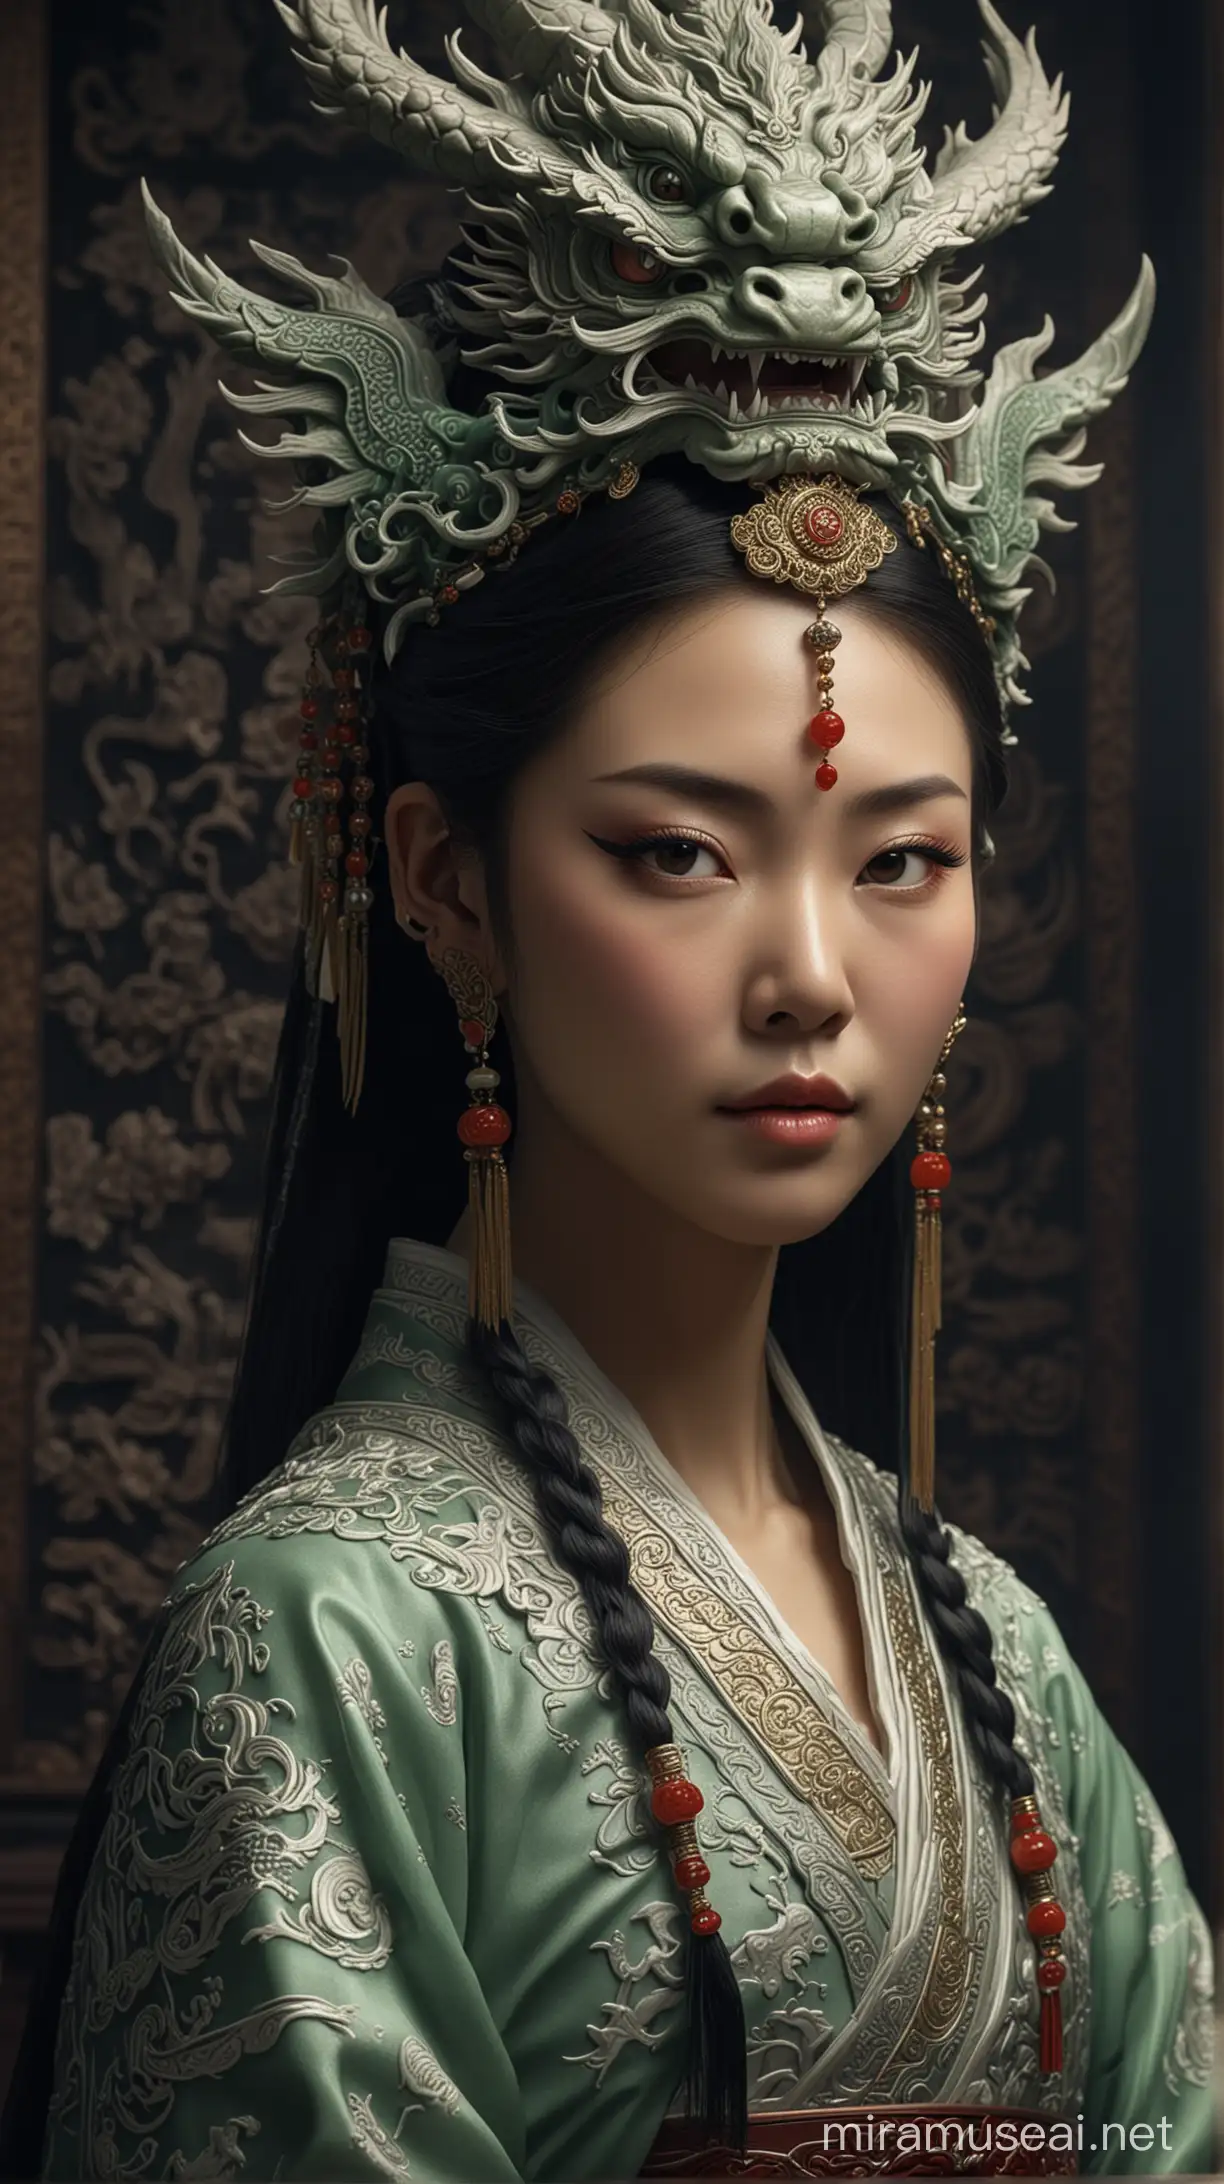 A Chinese Empress in traditional dress and headdress.gteen jade dragon carving background,rule of third, darkness electronic,photo realistic,cinematic,HDR.